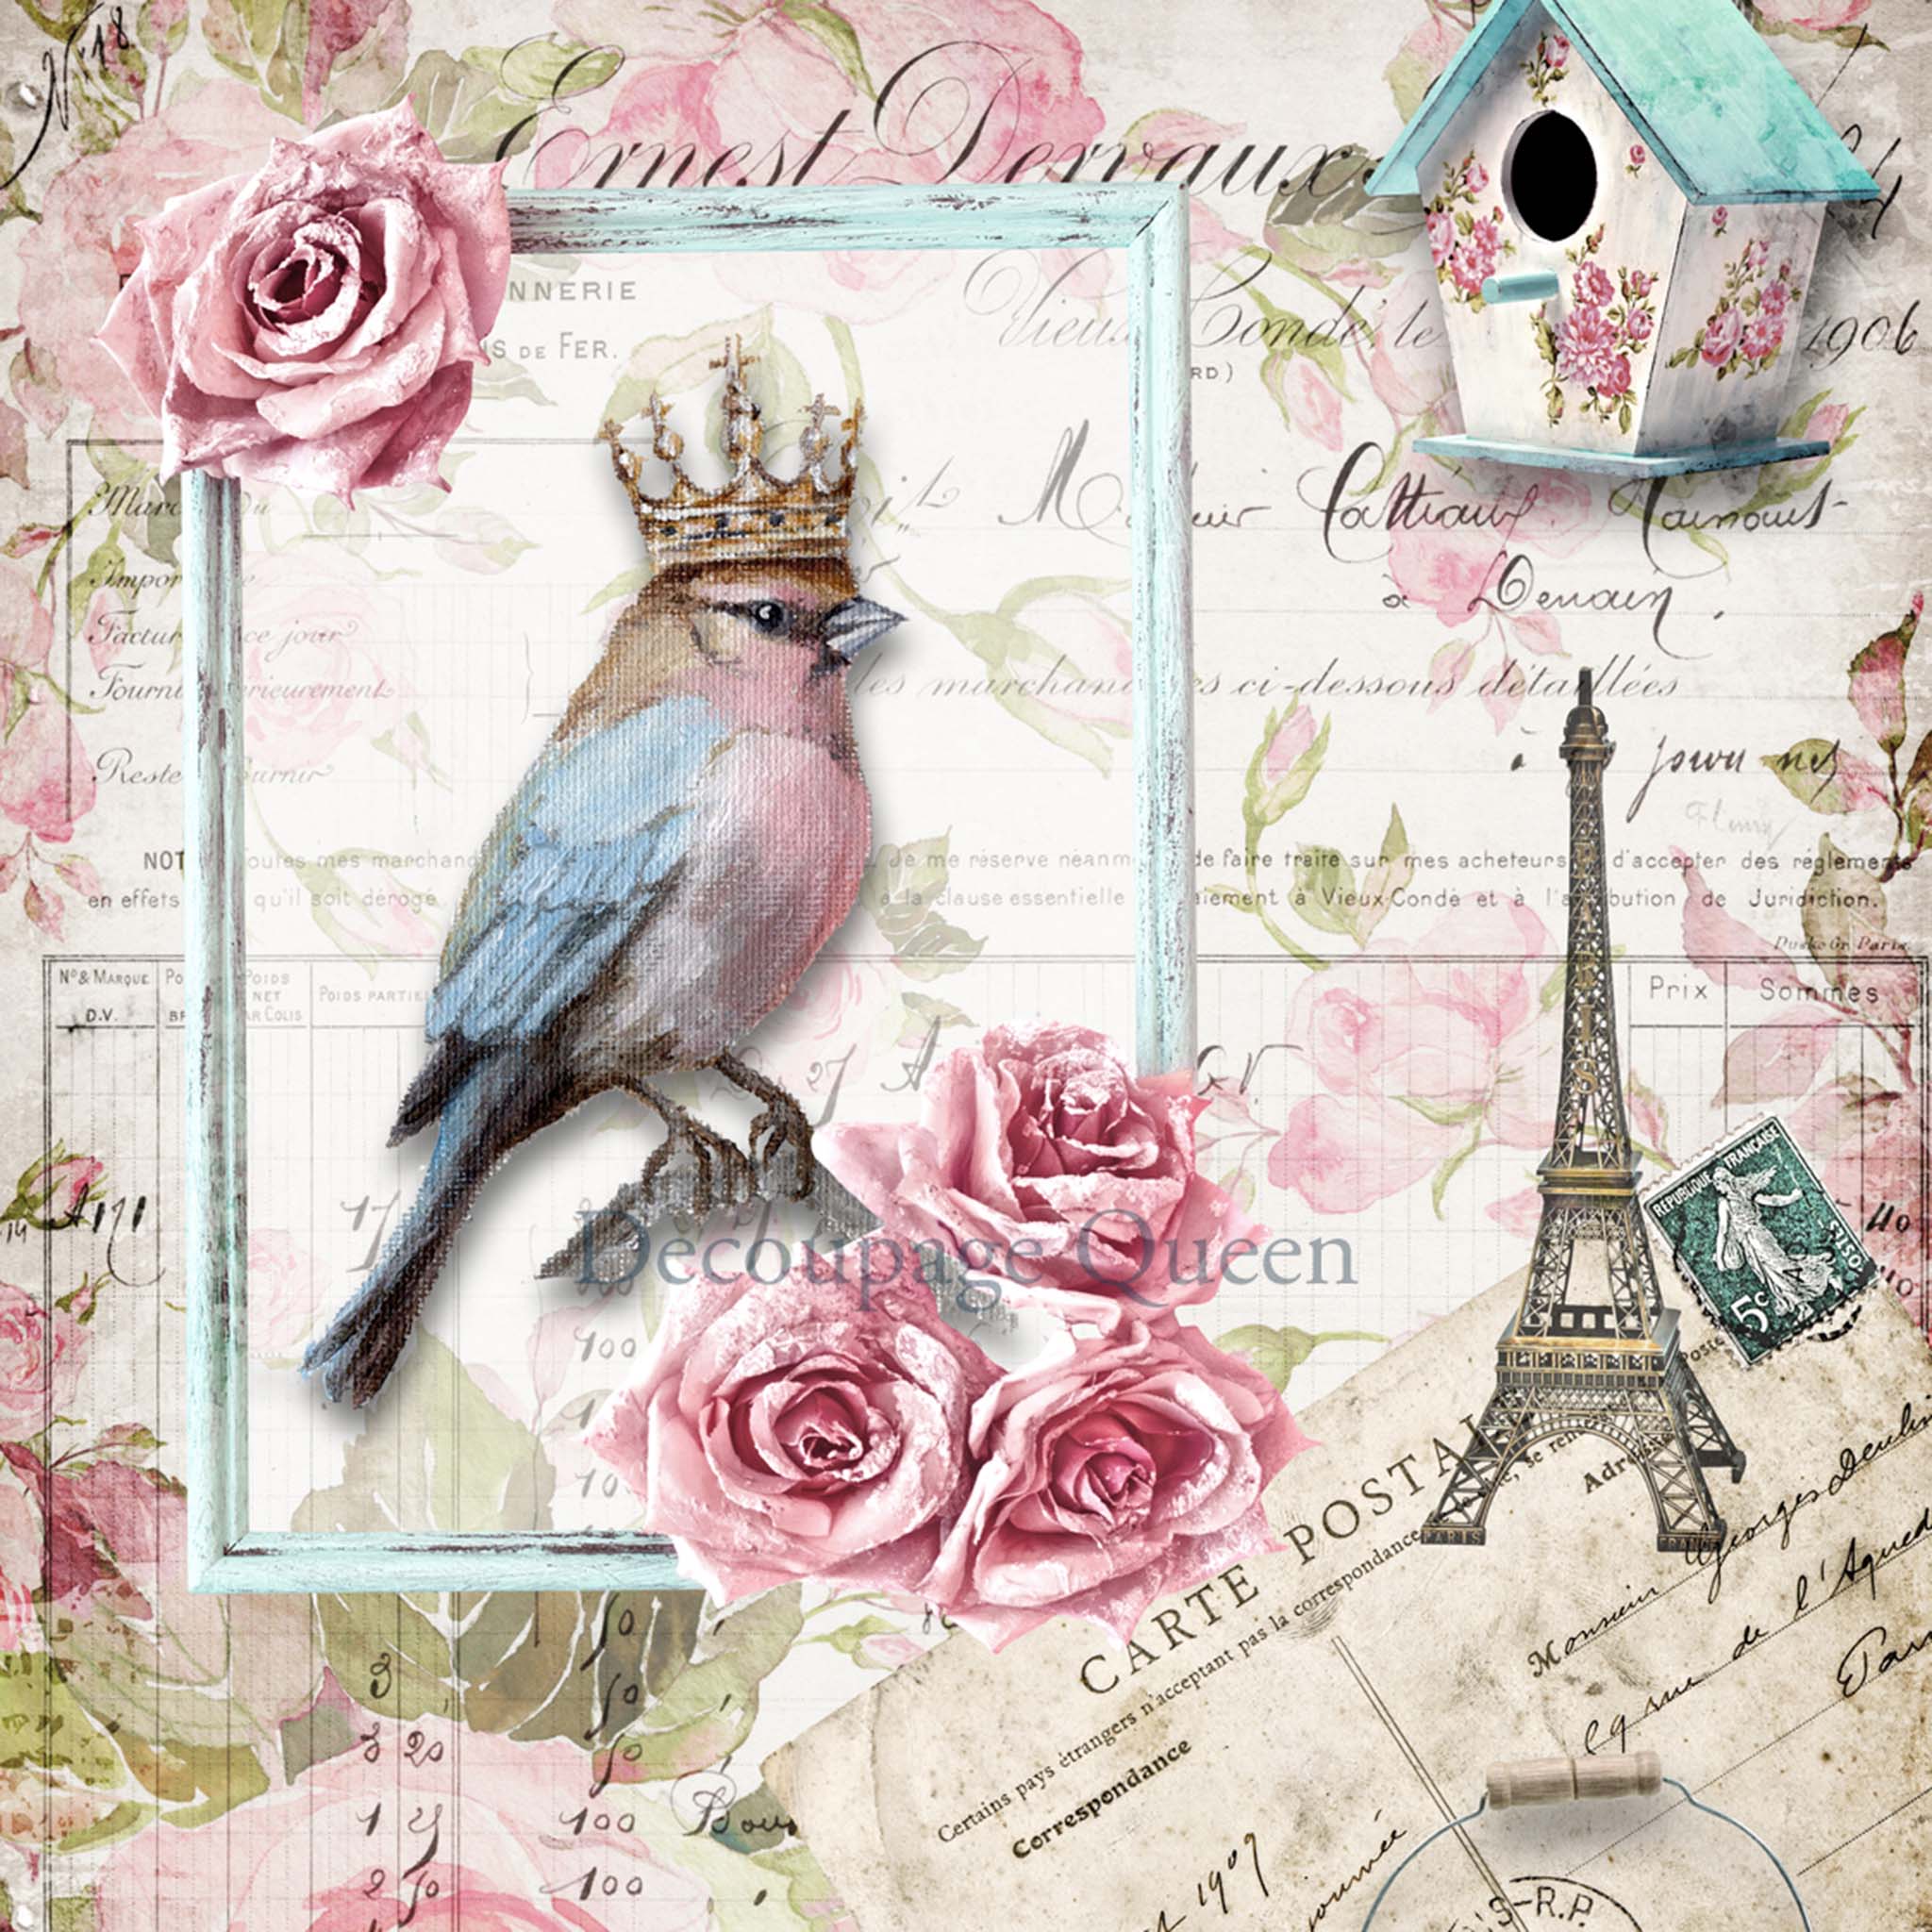 Close-up of an A3 rice paper design that features a small bird wearing a crown perched in a picture frame, surrounded by iconic Parisian elements like the Eiffel Tower, a birdhouse, and a French postcard against a floral background.